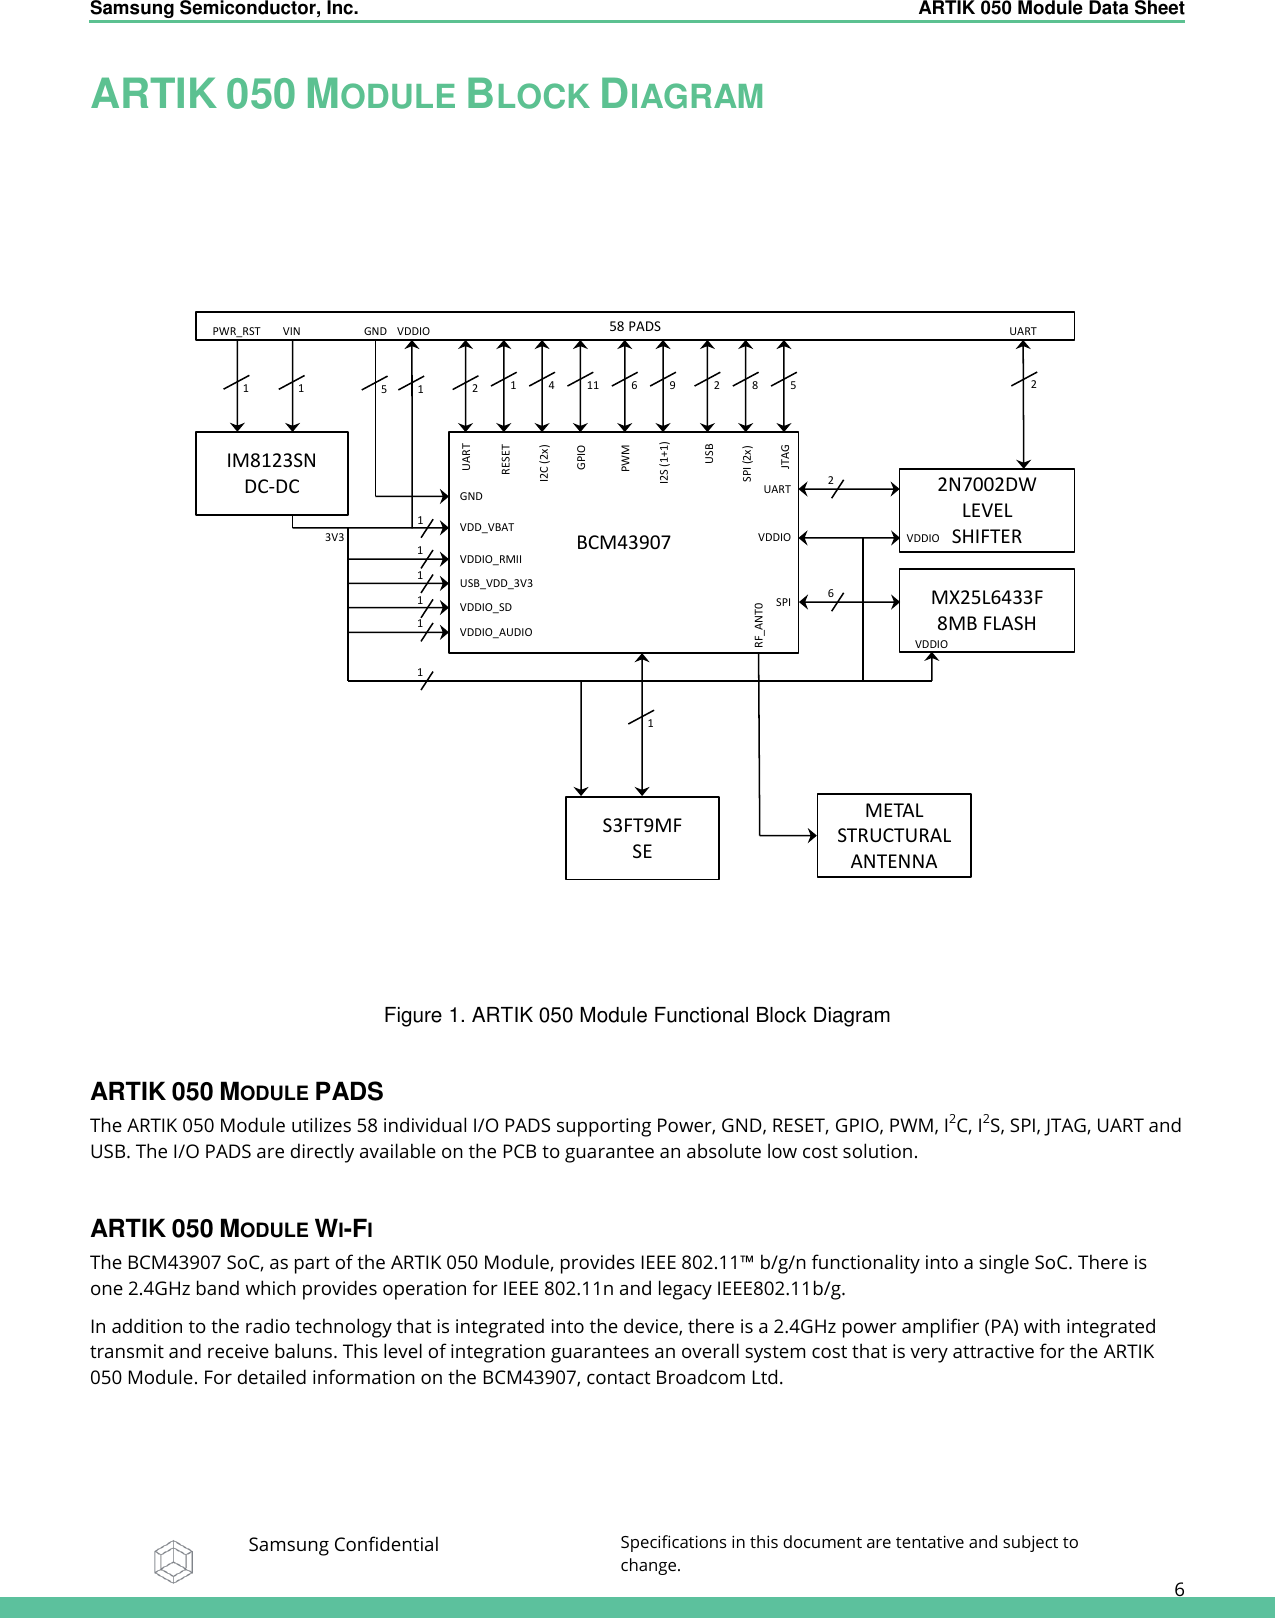 Samsung Semiconductor, Inc.  ARTIK 050 Module Data Sheet   Samsung Confidential Specifications in this document are tentative and subject to change.  6 ARTIK 050 MODULE BLOCK DIAGRAM   Figure 1. ARTIK 050 Module Functional Block Diagram  ARTIK 050 MODULE PADS The ARTIK 050 Module utilizes 58 individual I/O PADS supporting Power, GND, RESET, GPIO, PWM, I2C, I2S, SPI, JTAG, UART and USB. The I/O PADS are directly available on the PCB to guarantee an absolute low cost solution.  ARTIK 050 MODULE WI-FI The BCM43907 SoC, as part of the ARTIK 050 Module, provides IEEE 802.11™ b/g/n functionality into a single SoC. There is one 2.4GHz band which provides operation for IEEE 802.11n and legacy IEEE802.11b/g. In addition to the radio technology that is integrated into the device, there is a 2.4GHz power amplifier (PA) with integrated transmit and receive baluns. This level of integration guarantees an overall system cost that is very attractive for the ARTIK 050 Module. For detailed information on the BCM43907, contact Broadcom Ltd. BCM43907MX25L6433F8MB FLASHS3FT9MFSE658 PADSSPIPWM6RESET1I2C (2x)4GPIO11 2USB9I2S (1+1)8SPI (2x)UART 22N7002DWLEVELSHIFTER25JTAG2UART5GNDVDD_VBAT1IM8123SNDC-DCVINVDDIO1UARTUSB_VDD_3V31VDDIO_RMII1VDDIO_AUDIO1VDDIO_SD111GNDVDDIO3V3 VDDIO1VDDIOMETAL STRUCTURAL ANTENNARF_ANT01PWR_RST